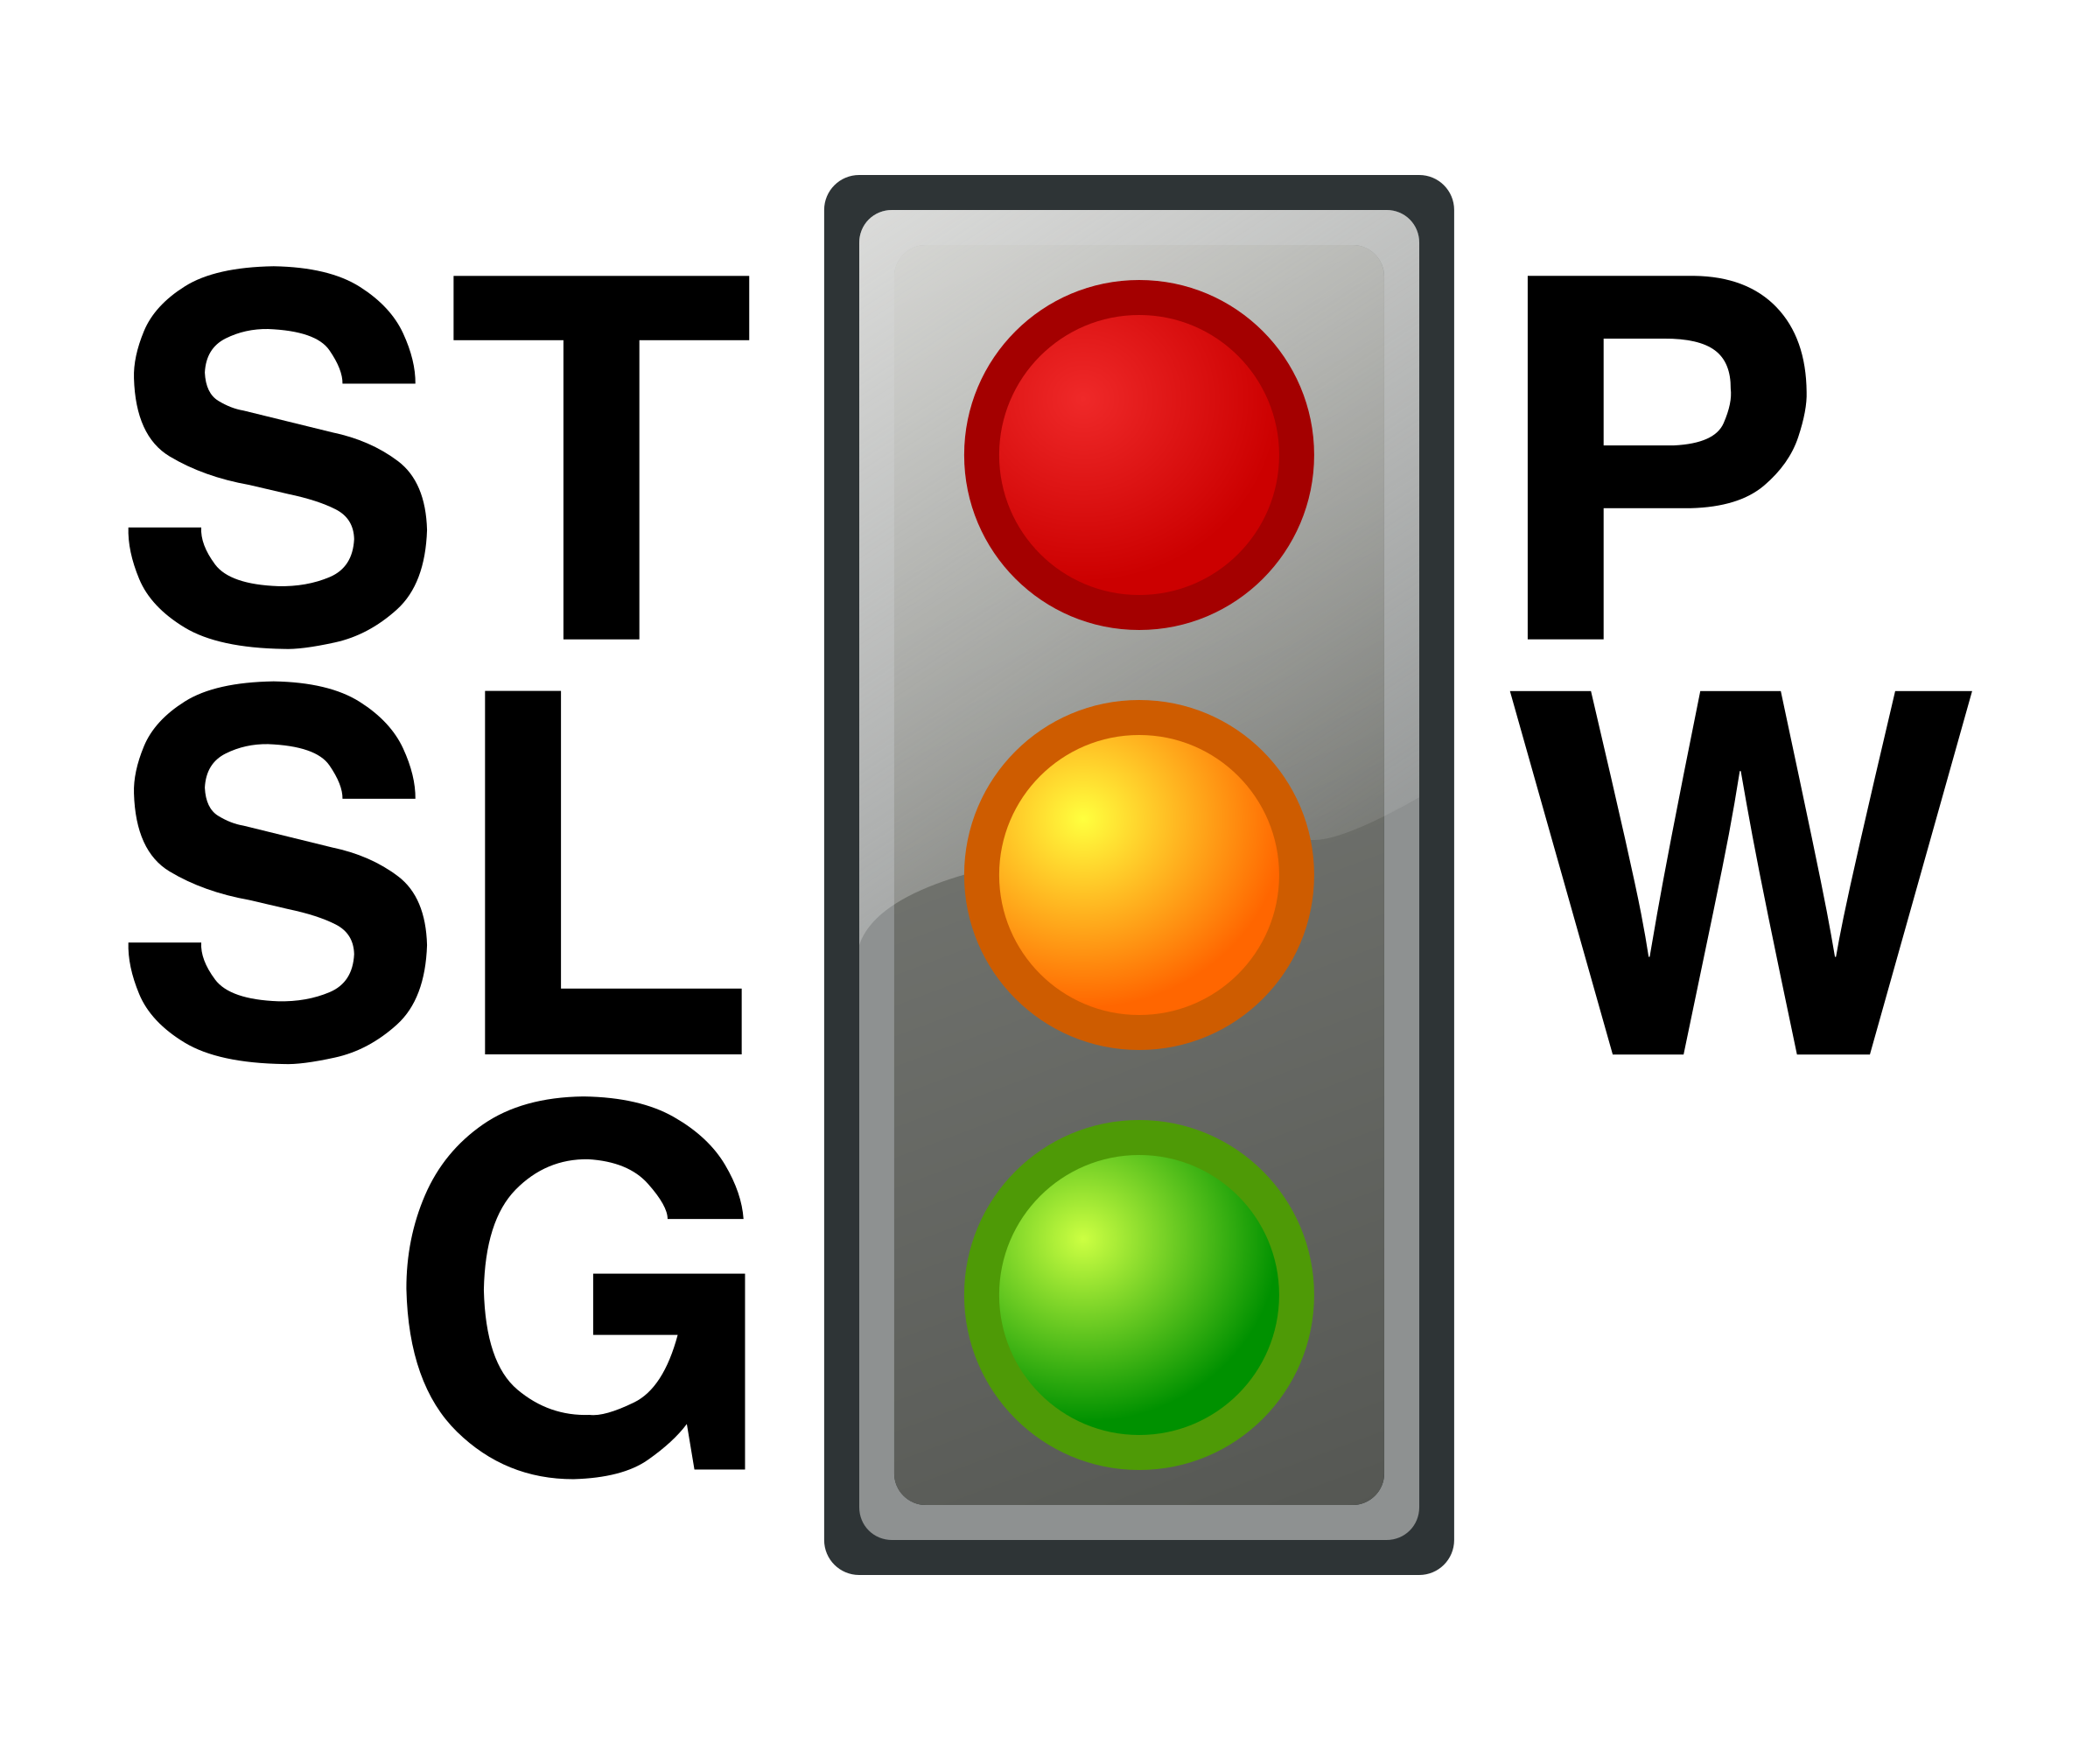 Stop light clipart meaning of the traffic lights